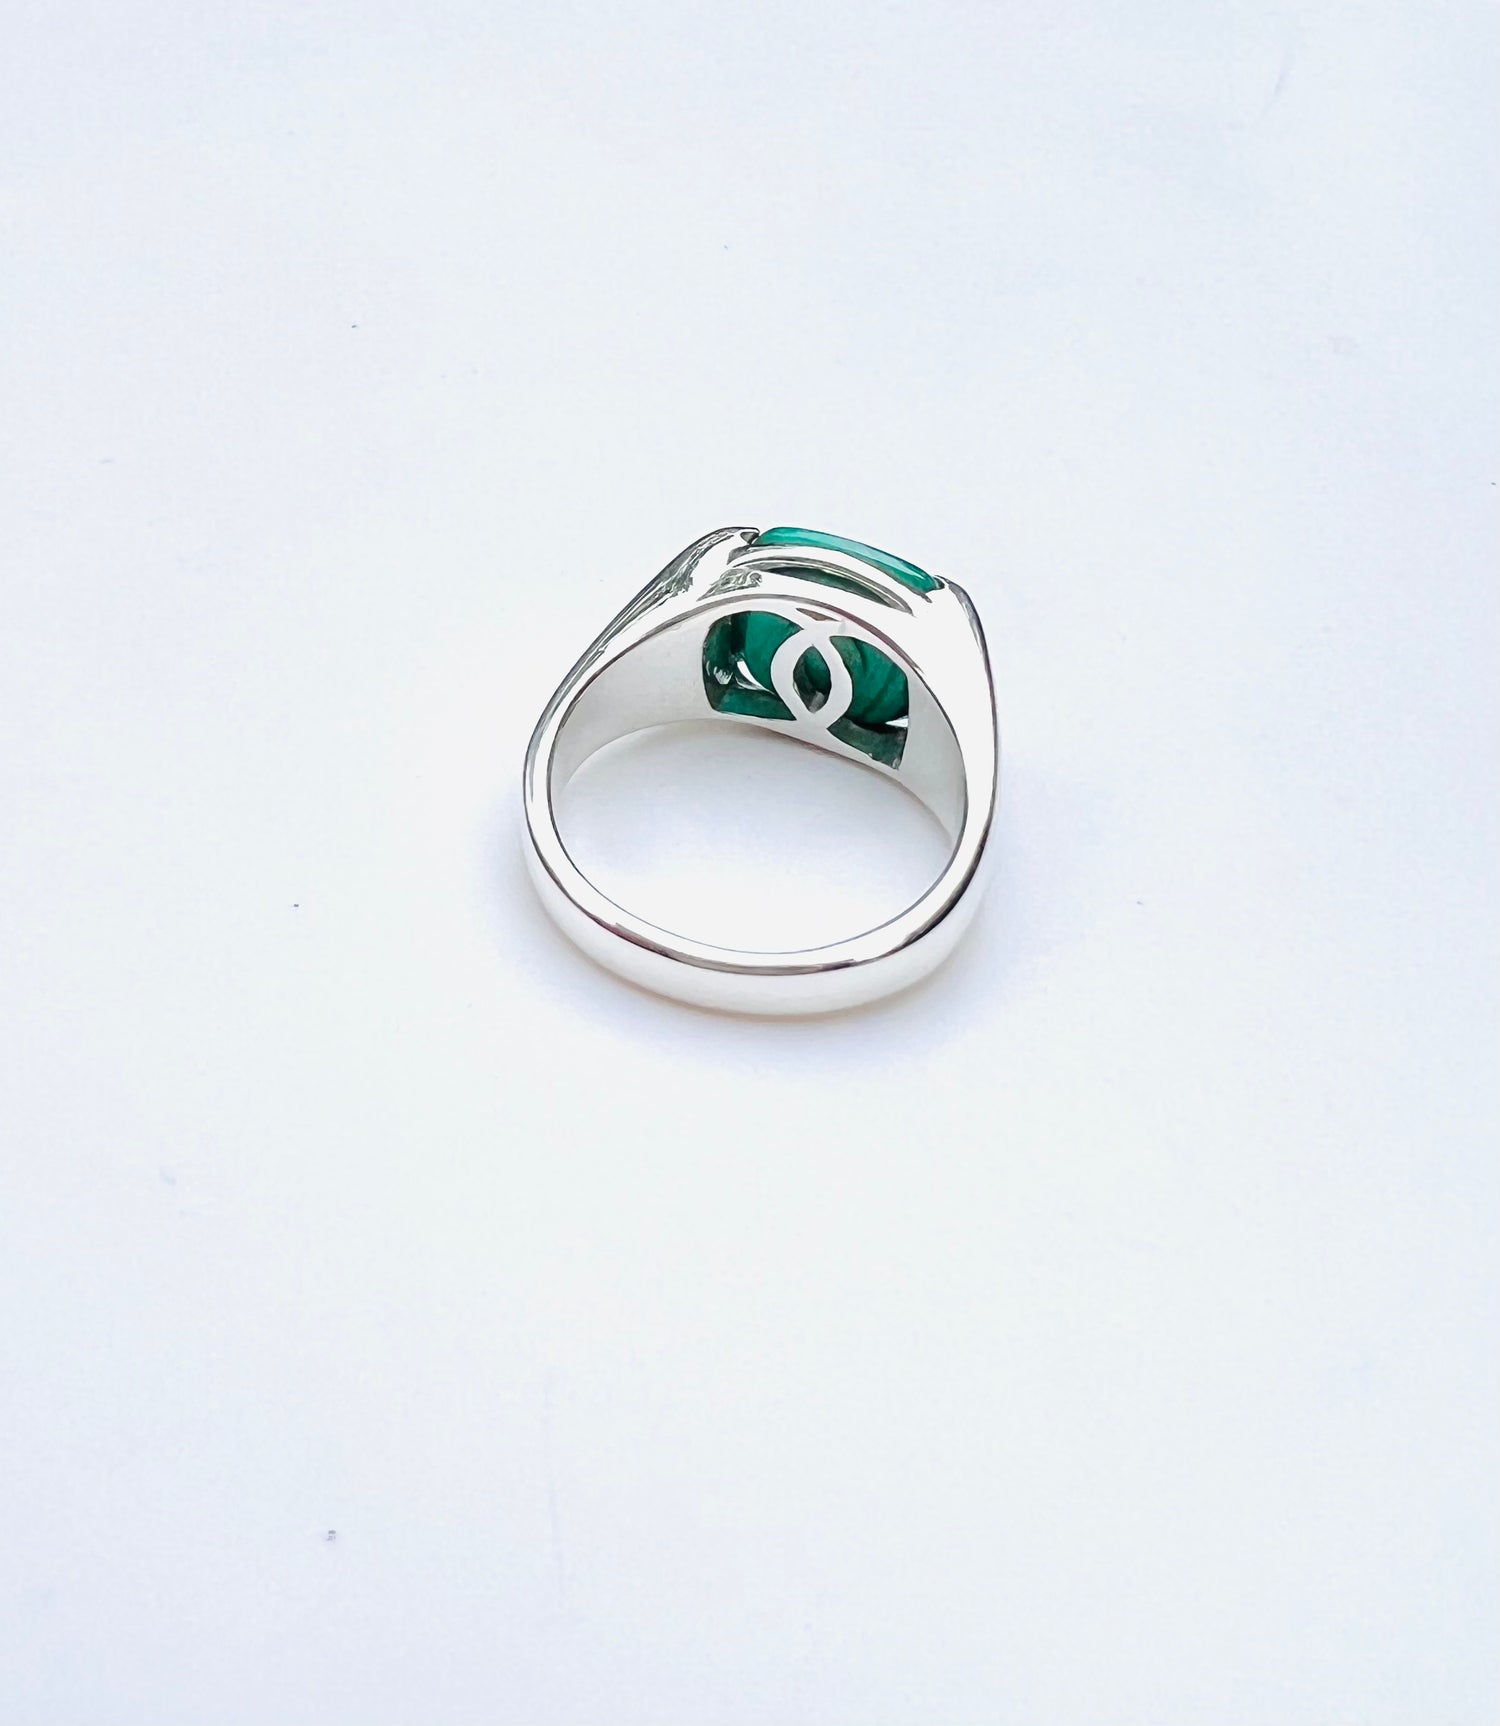 Inside view of Milan Piccolo Ring by Hannah Daye